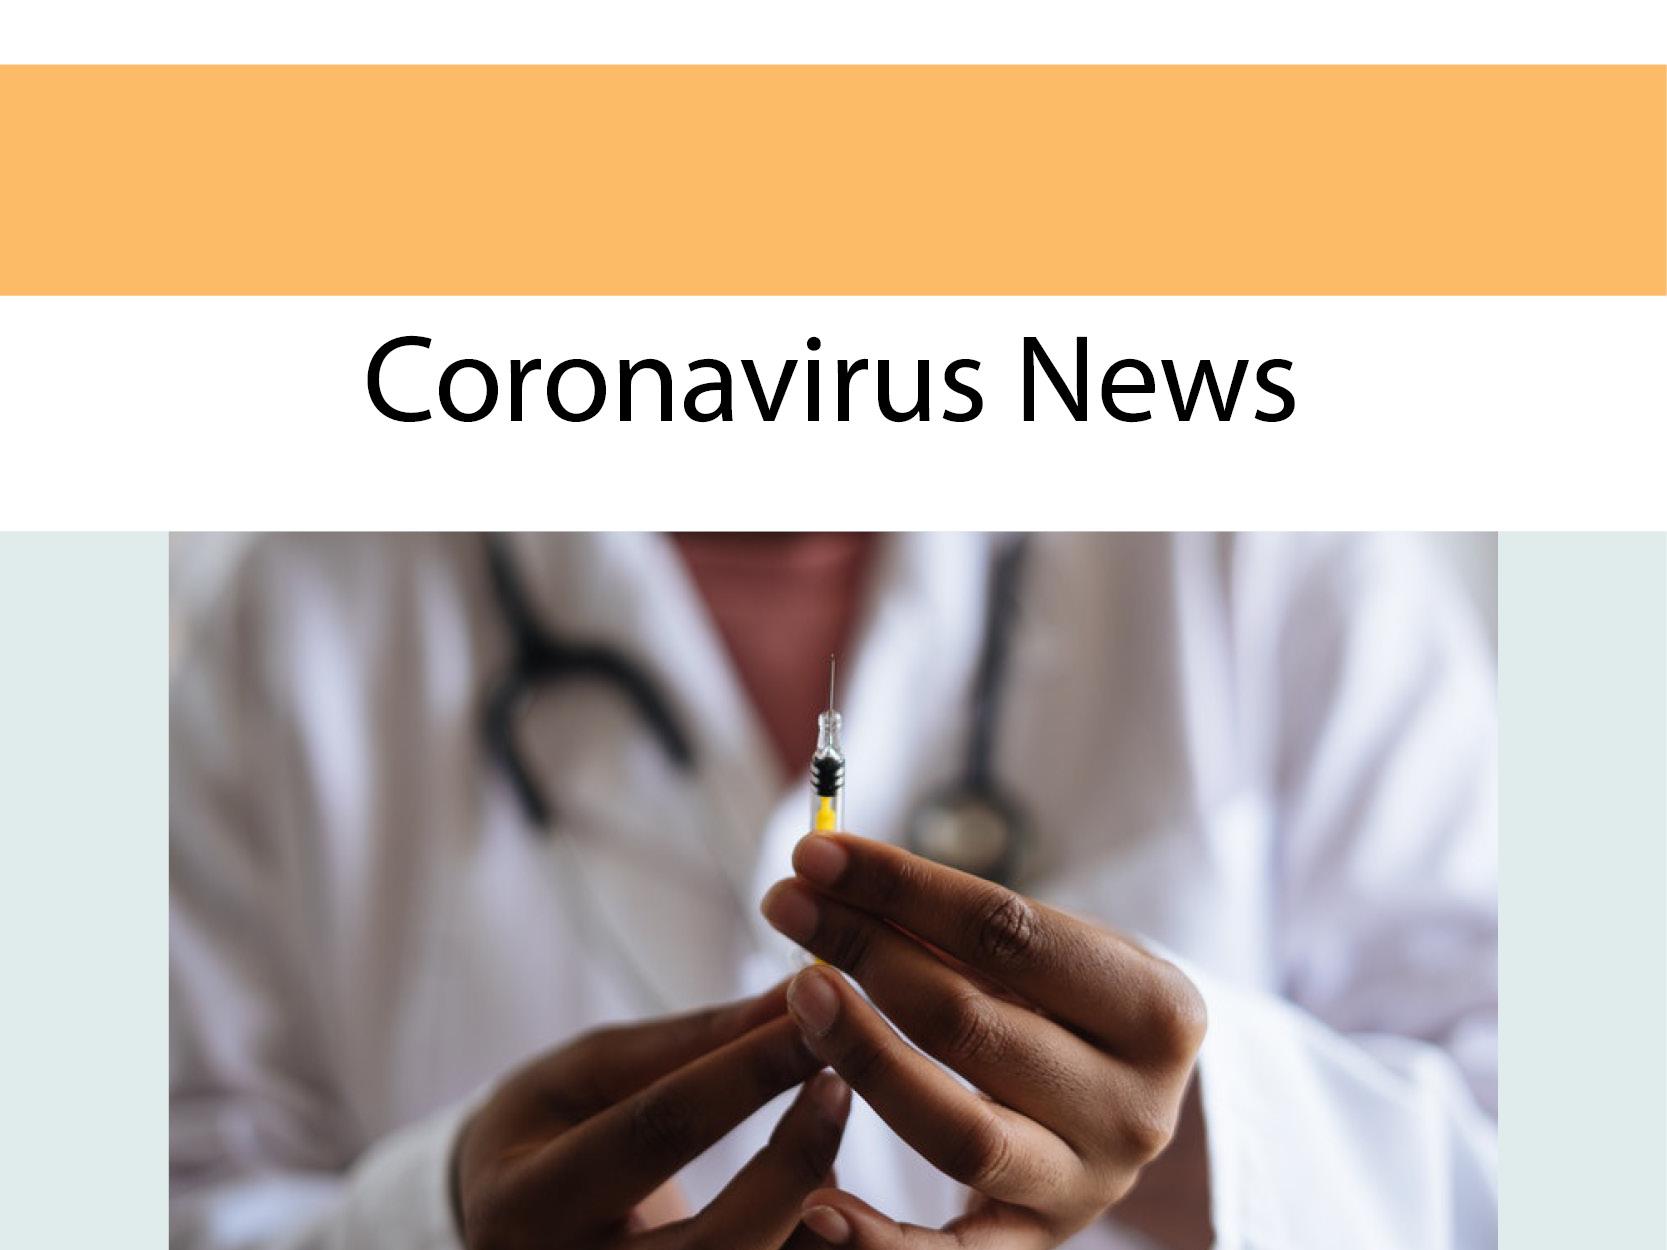 Eastern Ontario Health Unit COVID-19 vaccination update